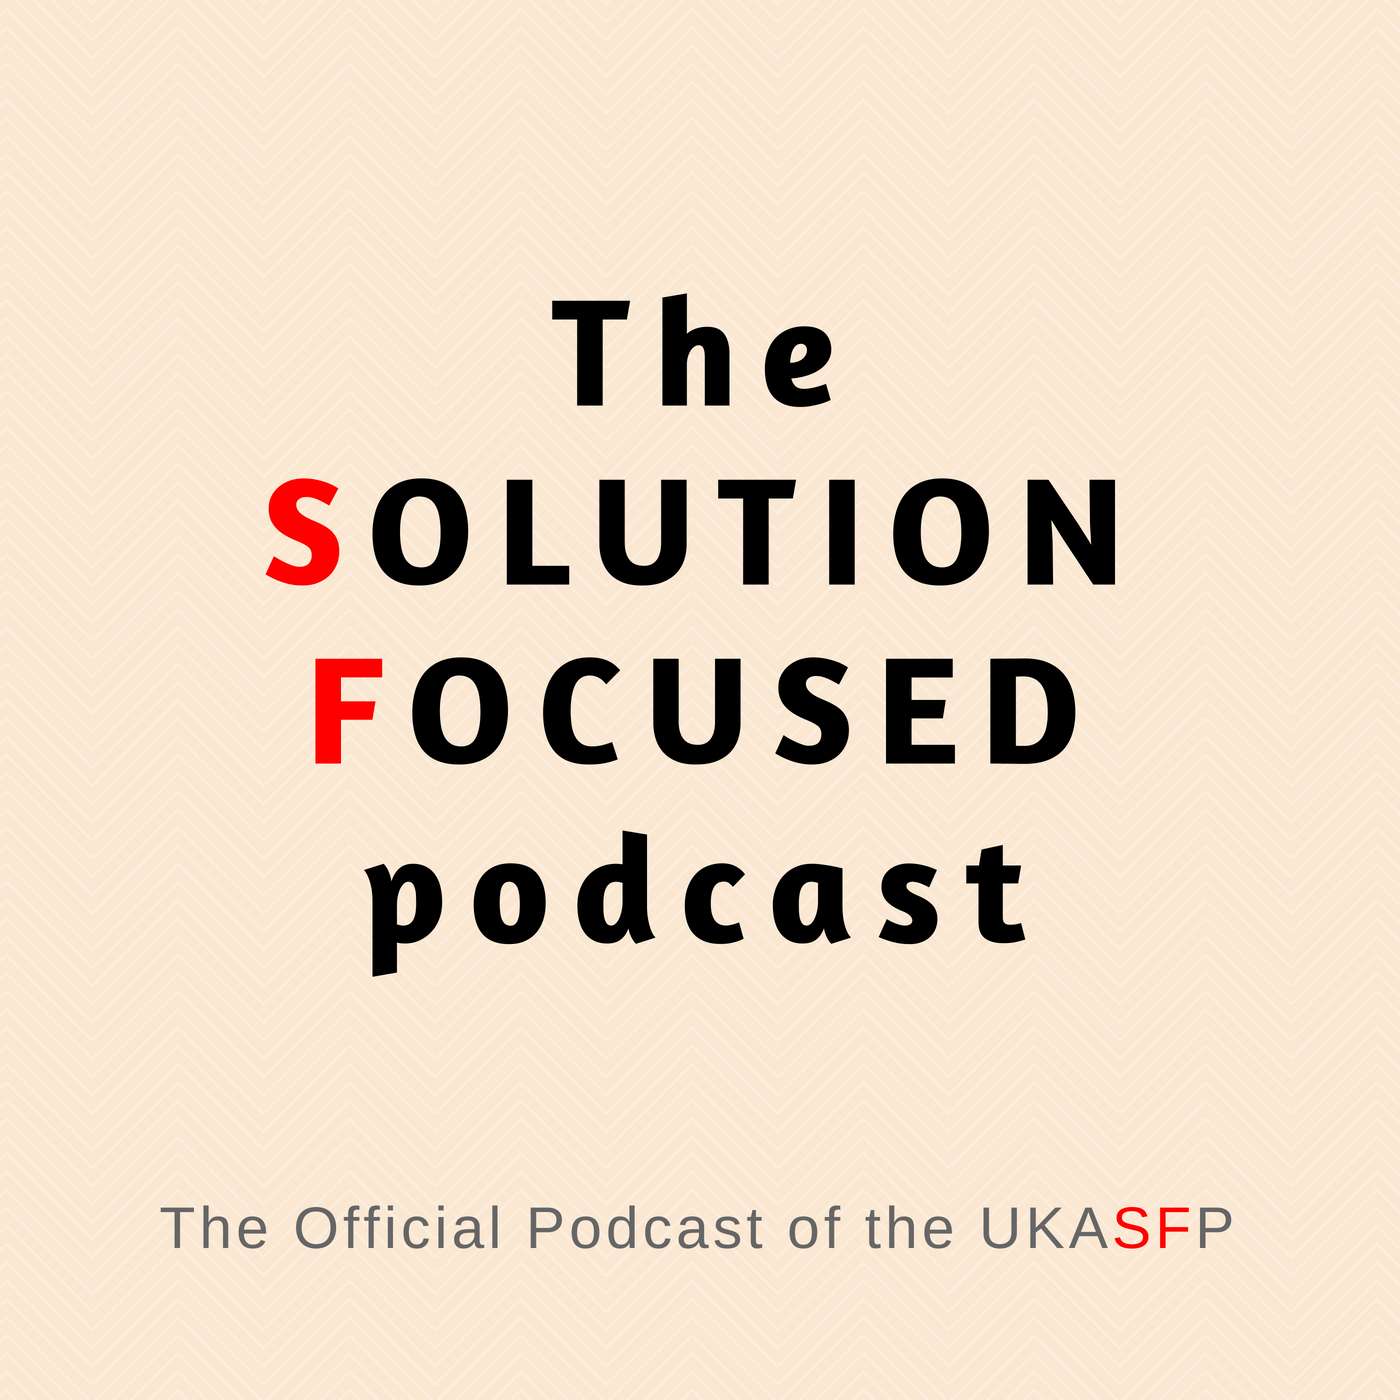 The Solution Focused Podcast